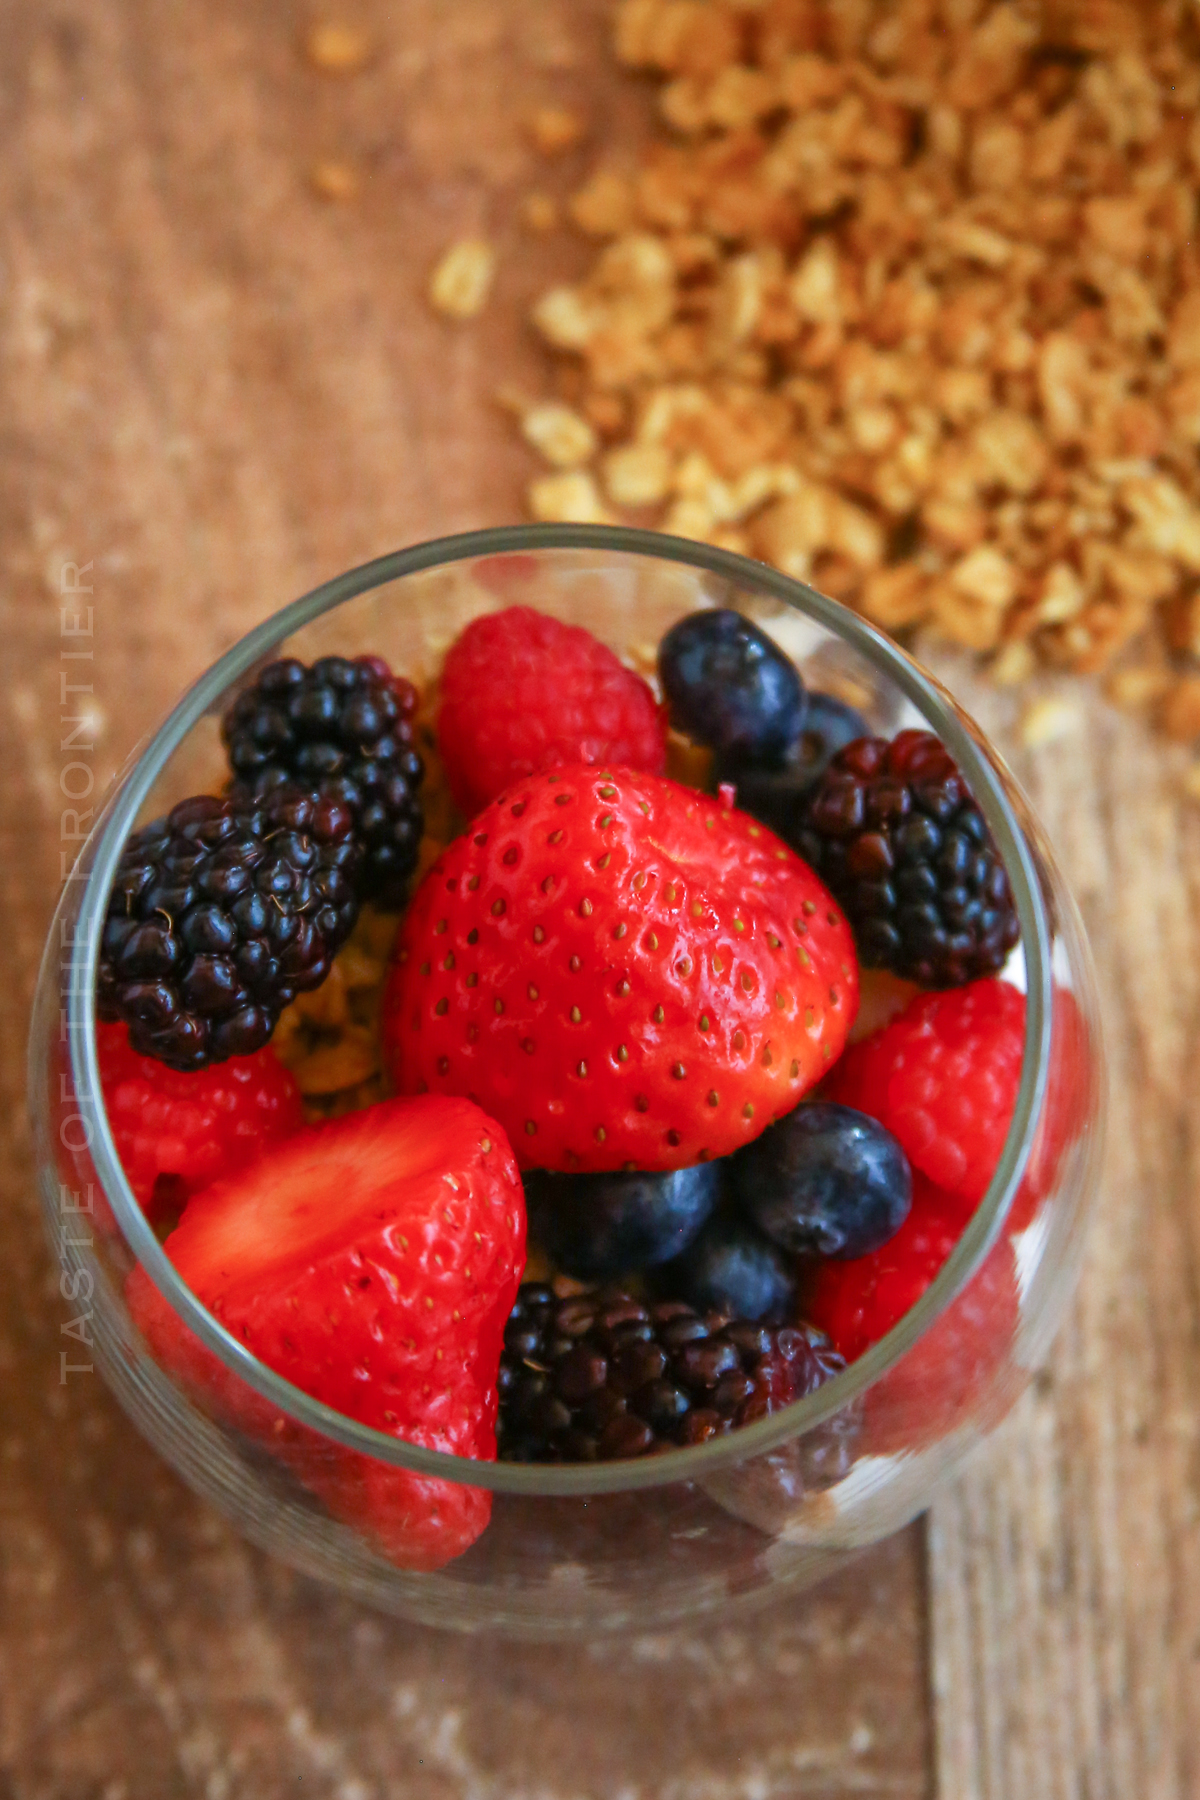 Parfait Recipe  Frosted Mixed Berry Shredded Wheat + Yogurt Fruit Cups